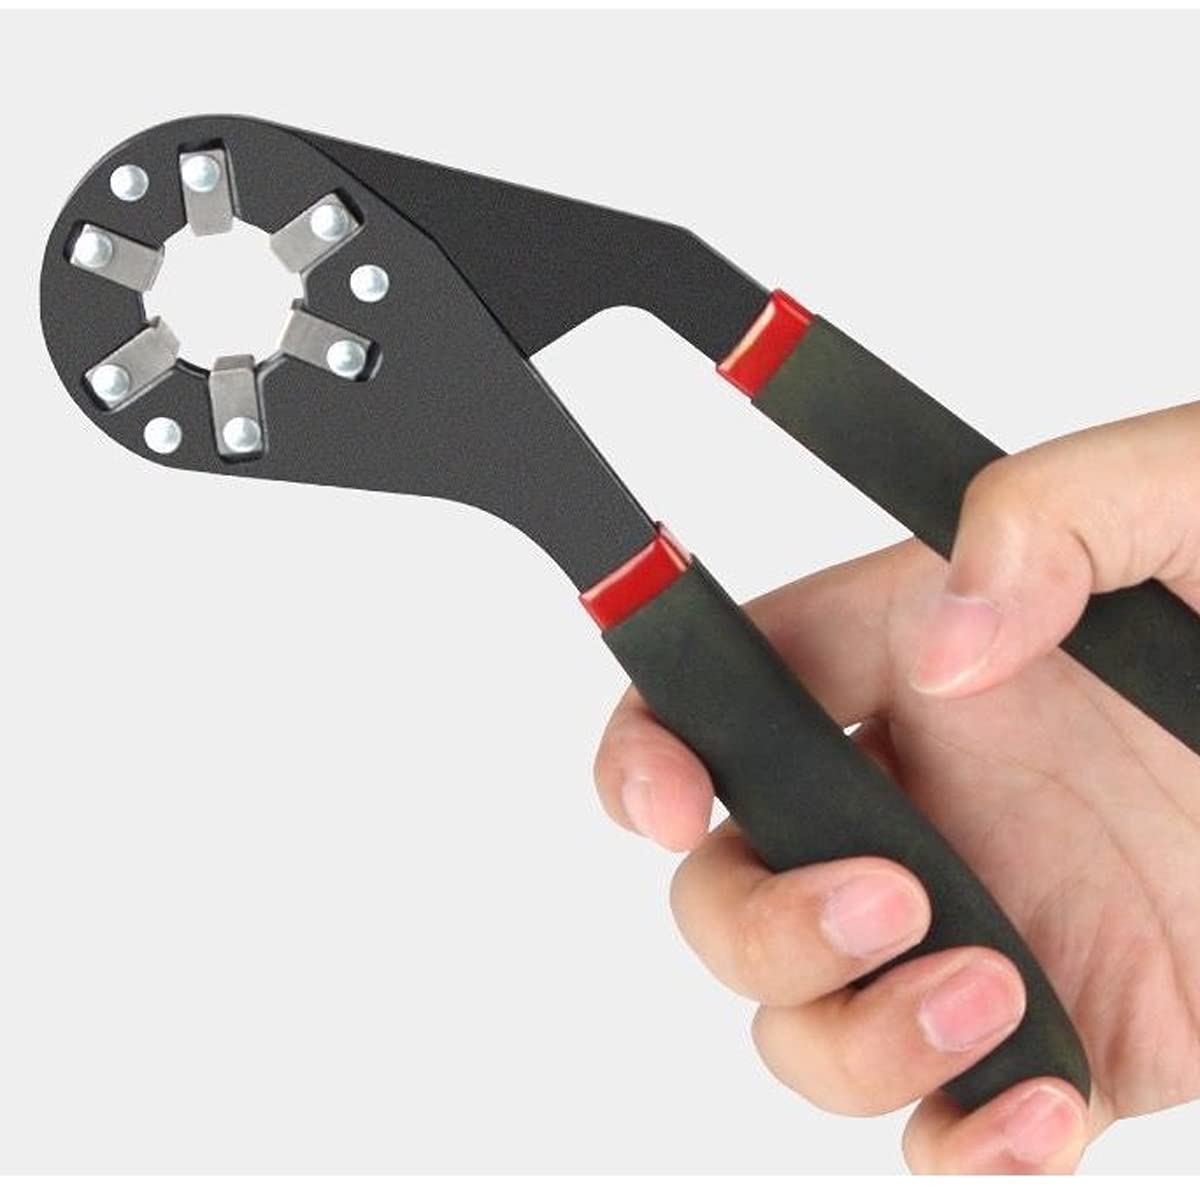 Someone is holding the 6 Inches Universal Magic Wrench, a multifunctional bionic adjustable hexagon spanner